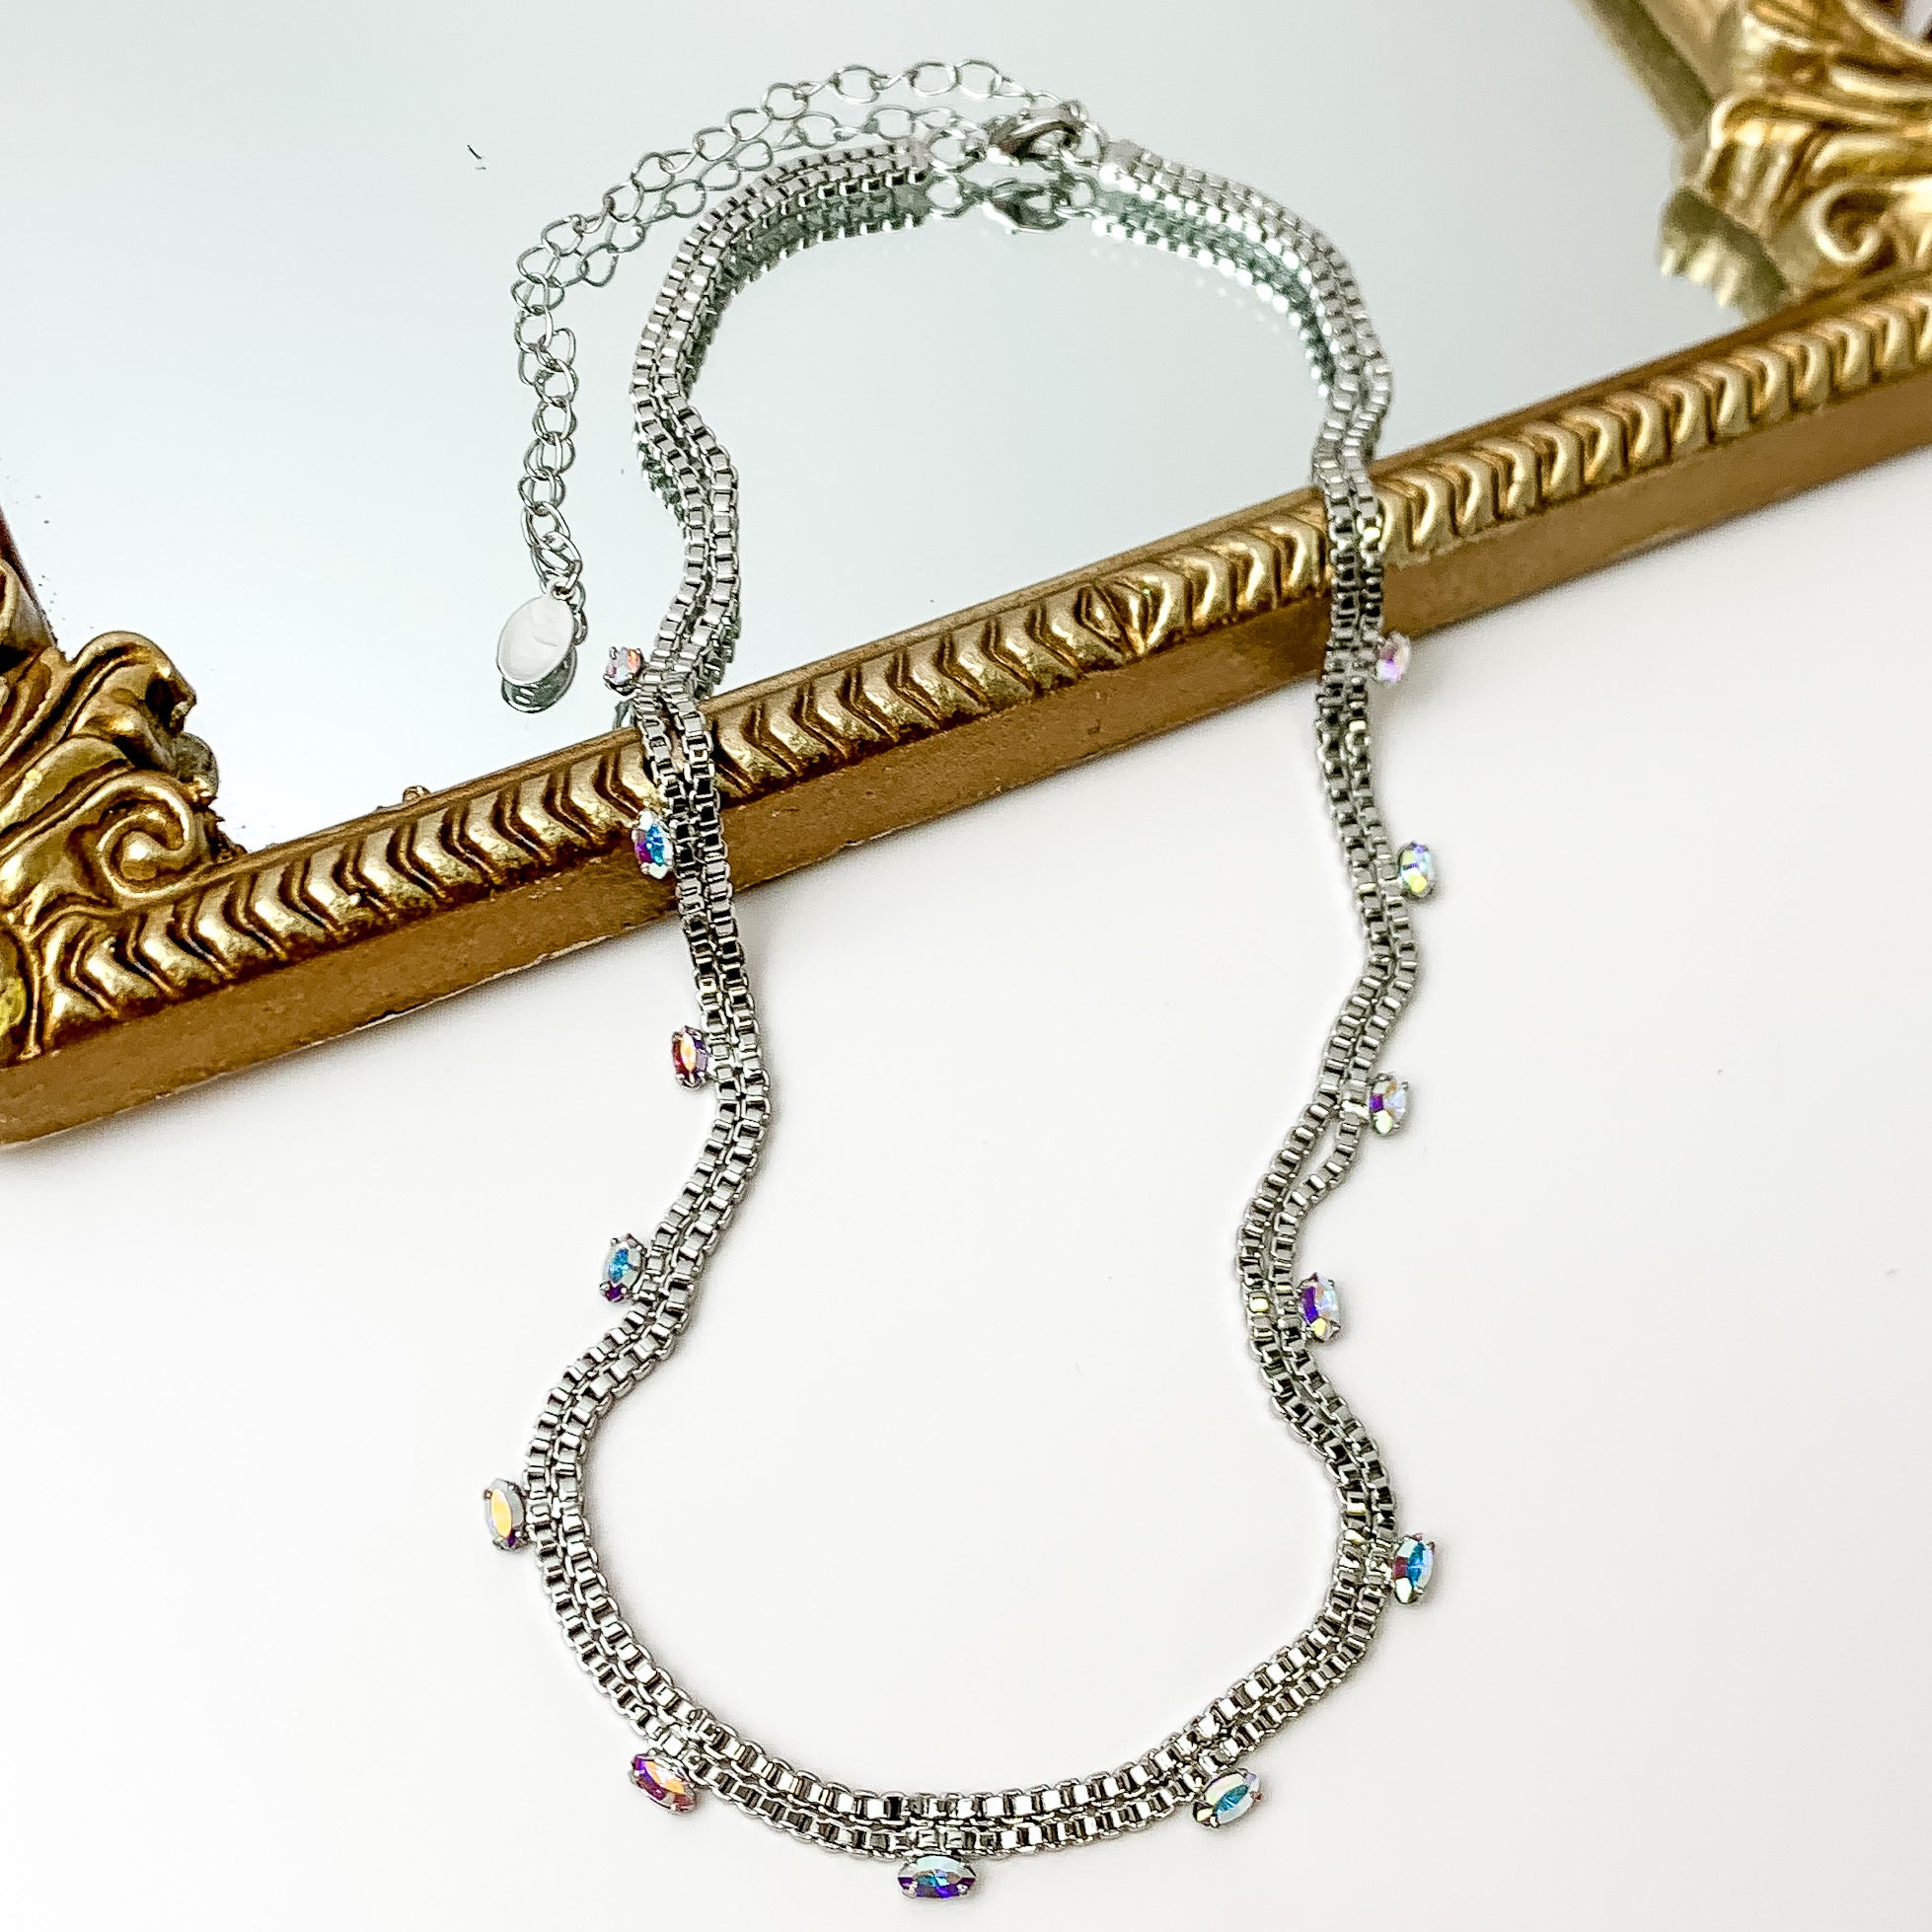 Pictured is a double, silver box chain necklace with ab crystal charms. This necklace is pictured partially laying on a gold mirror on a white background.    